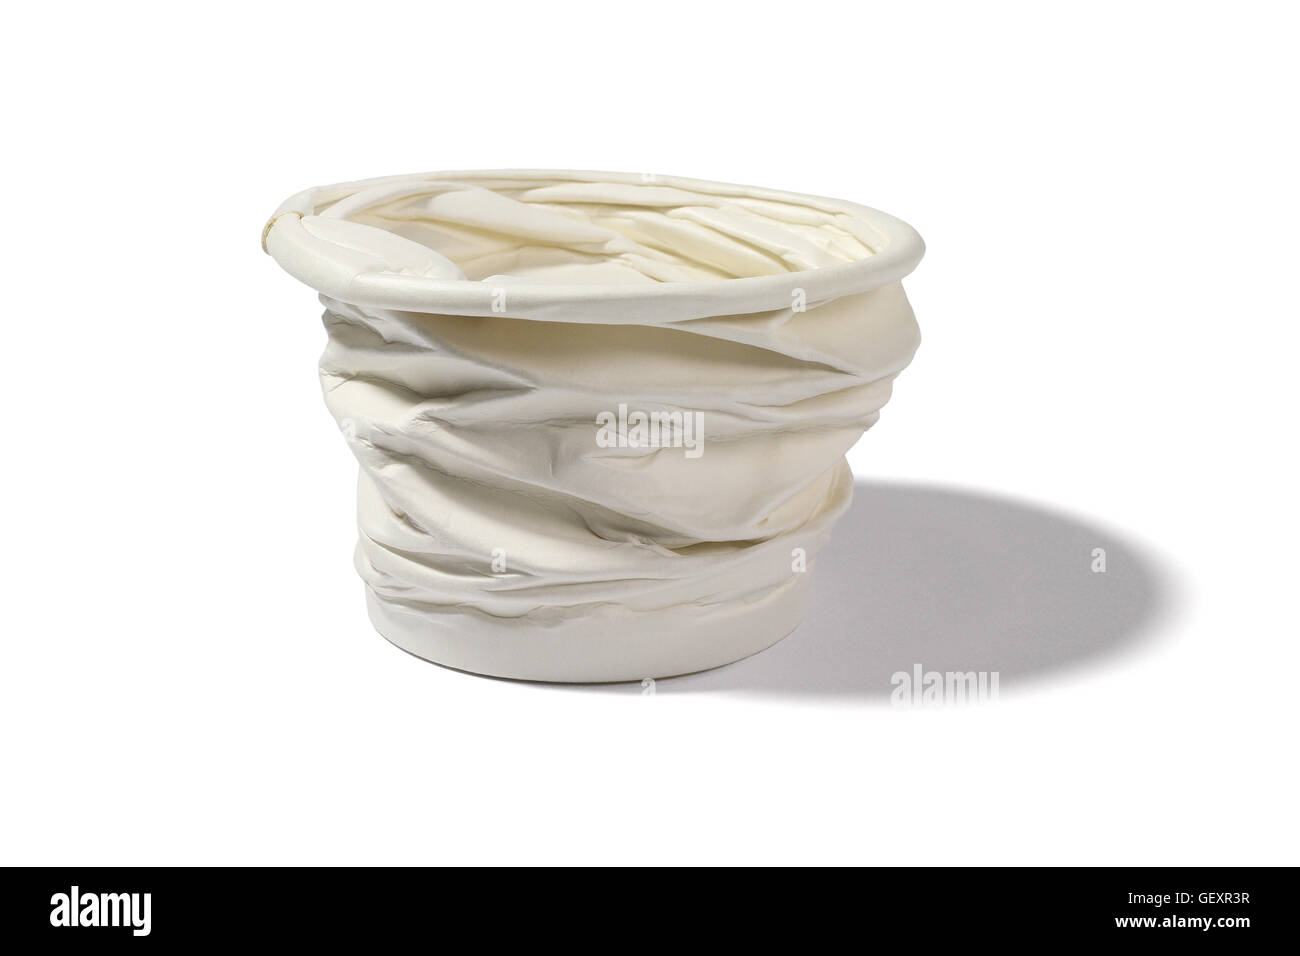 https://c8.alamy.com/comp/GEXR3R/crumpled-used-paper-cup-on-white-background-GEXR3R.jpg